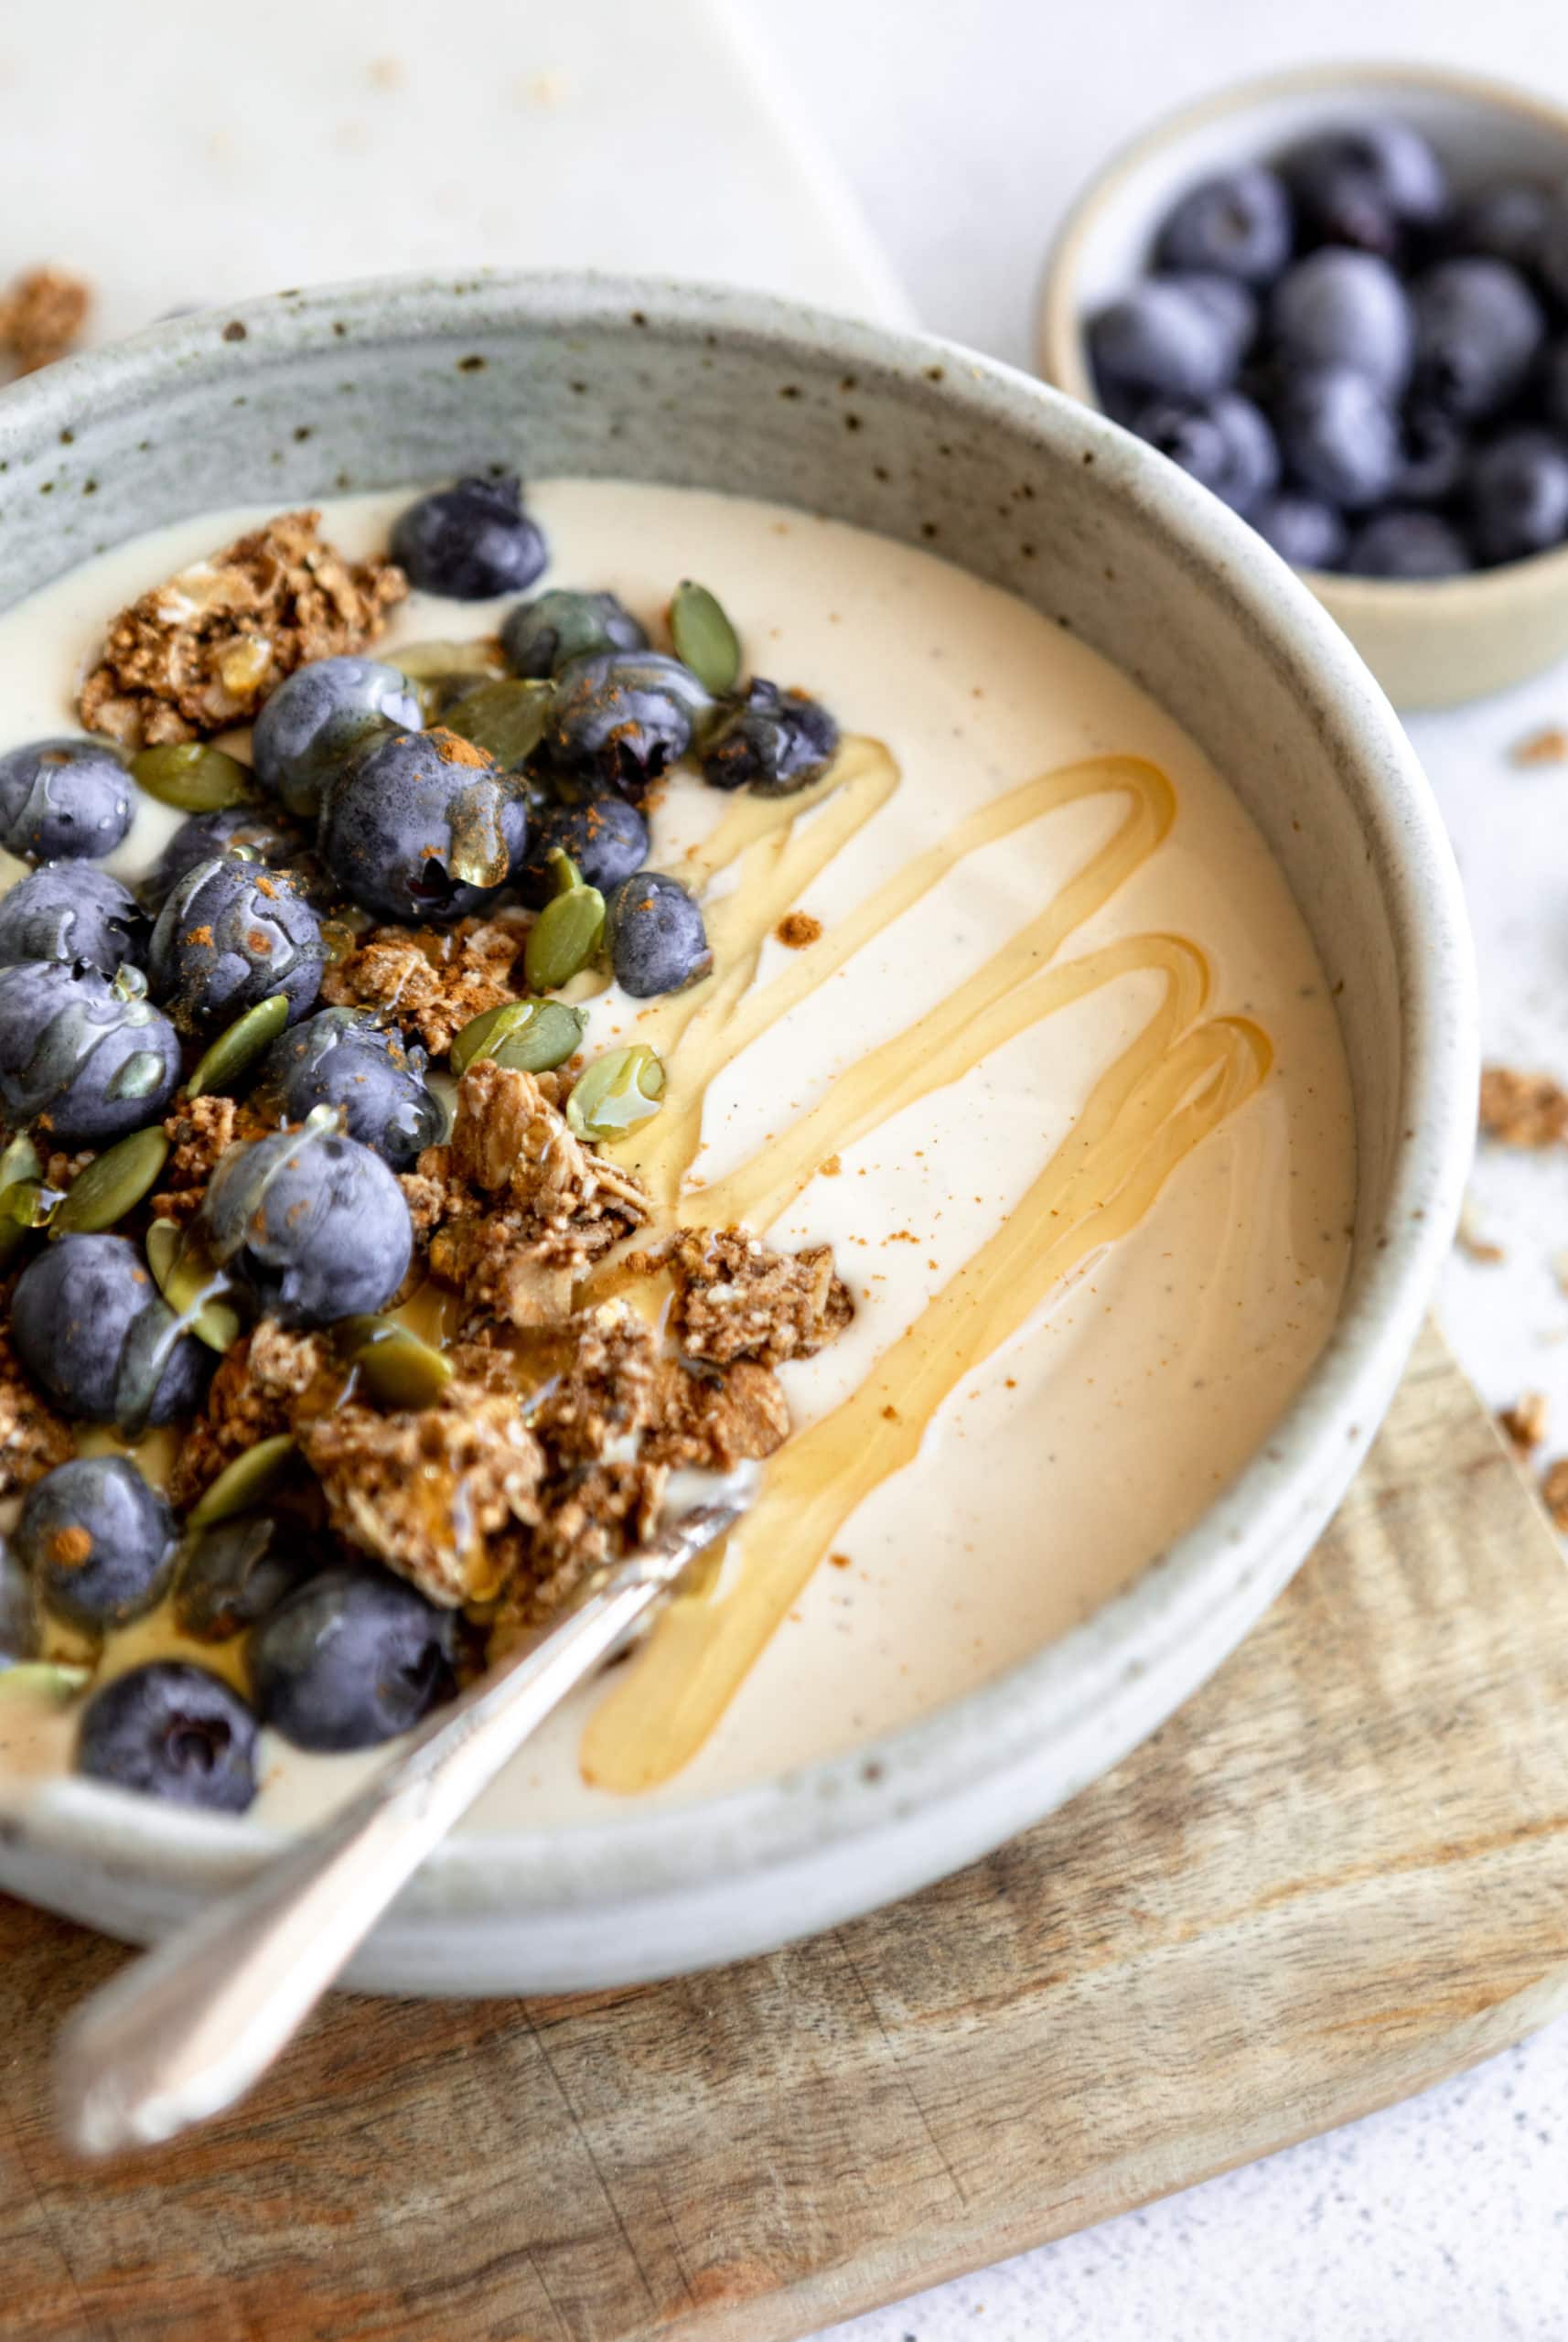 coconut yogurt in a white bowl topped with granola and fruit.